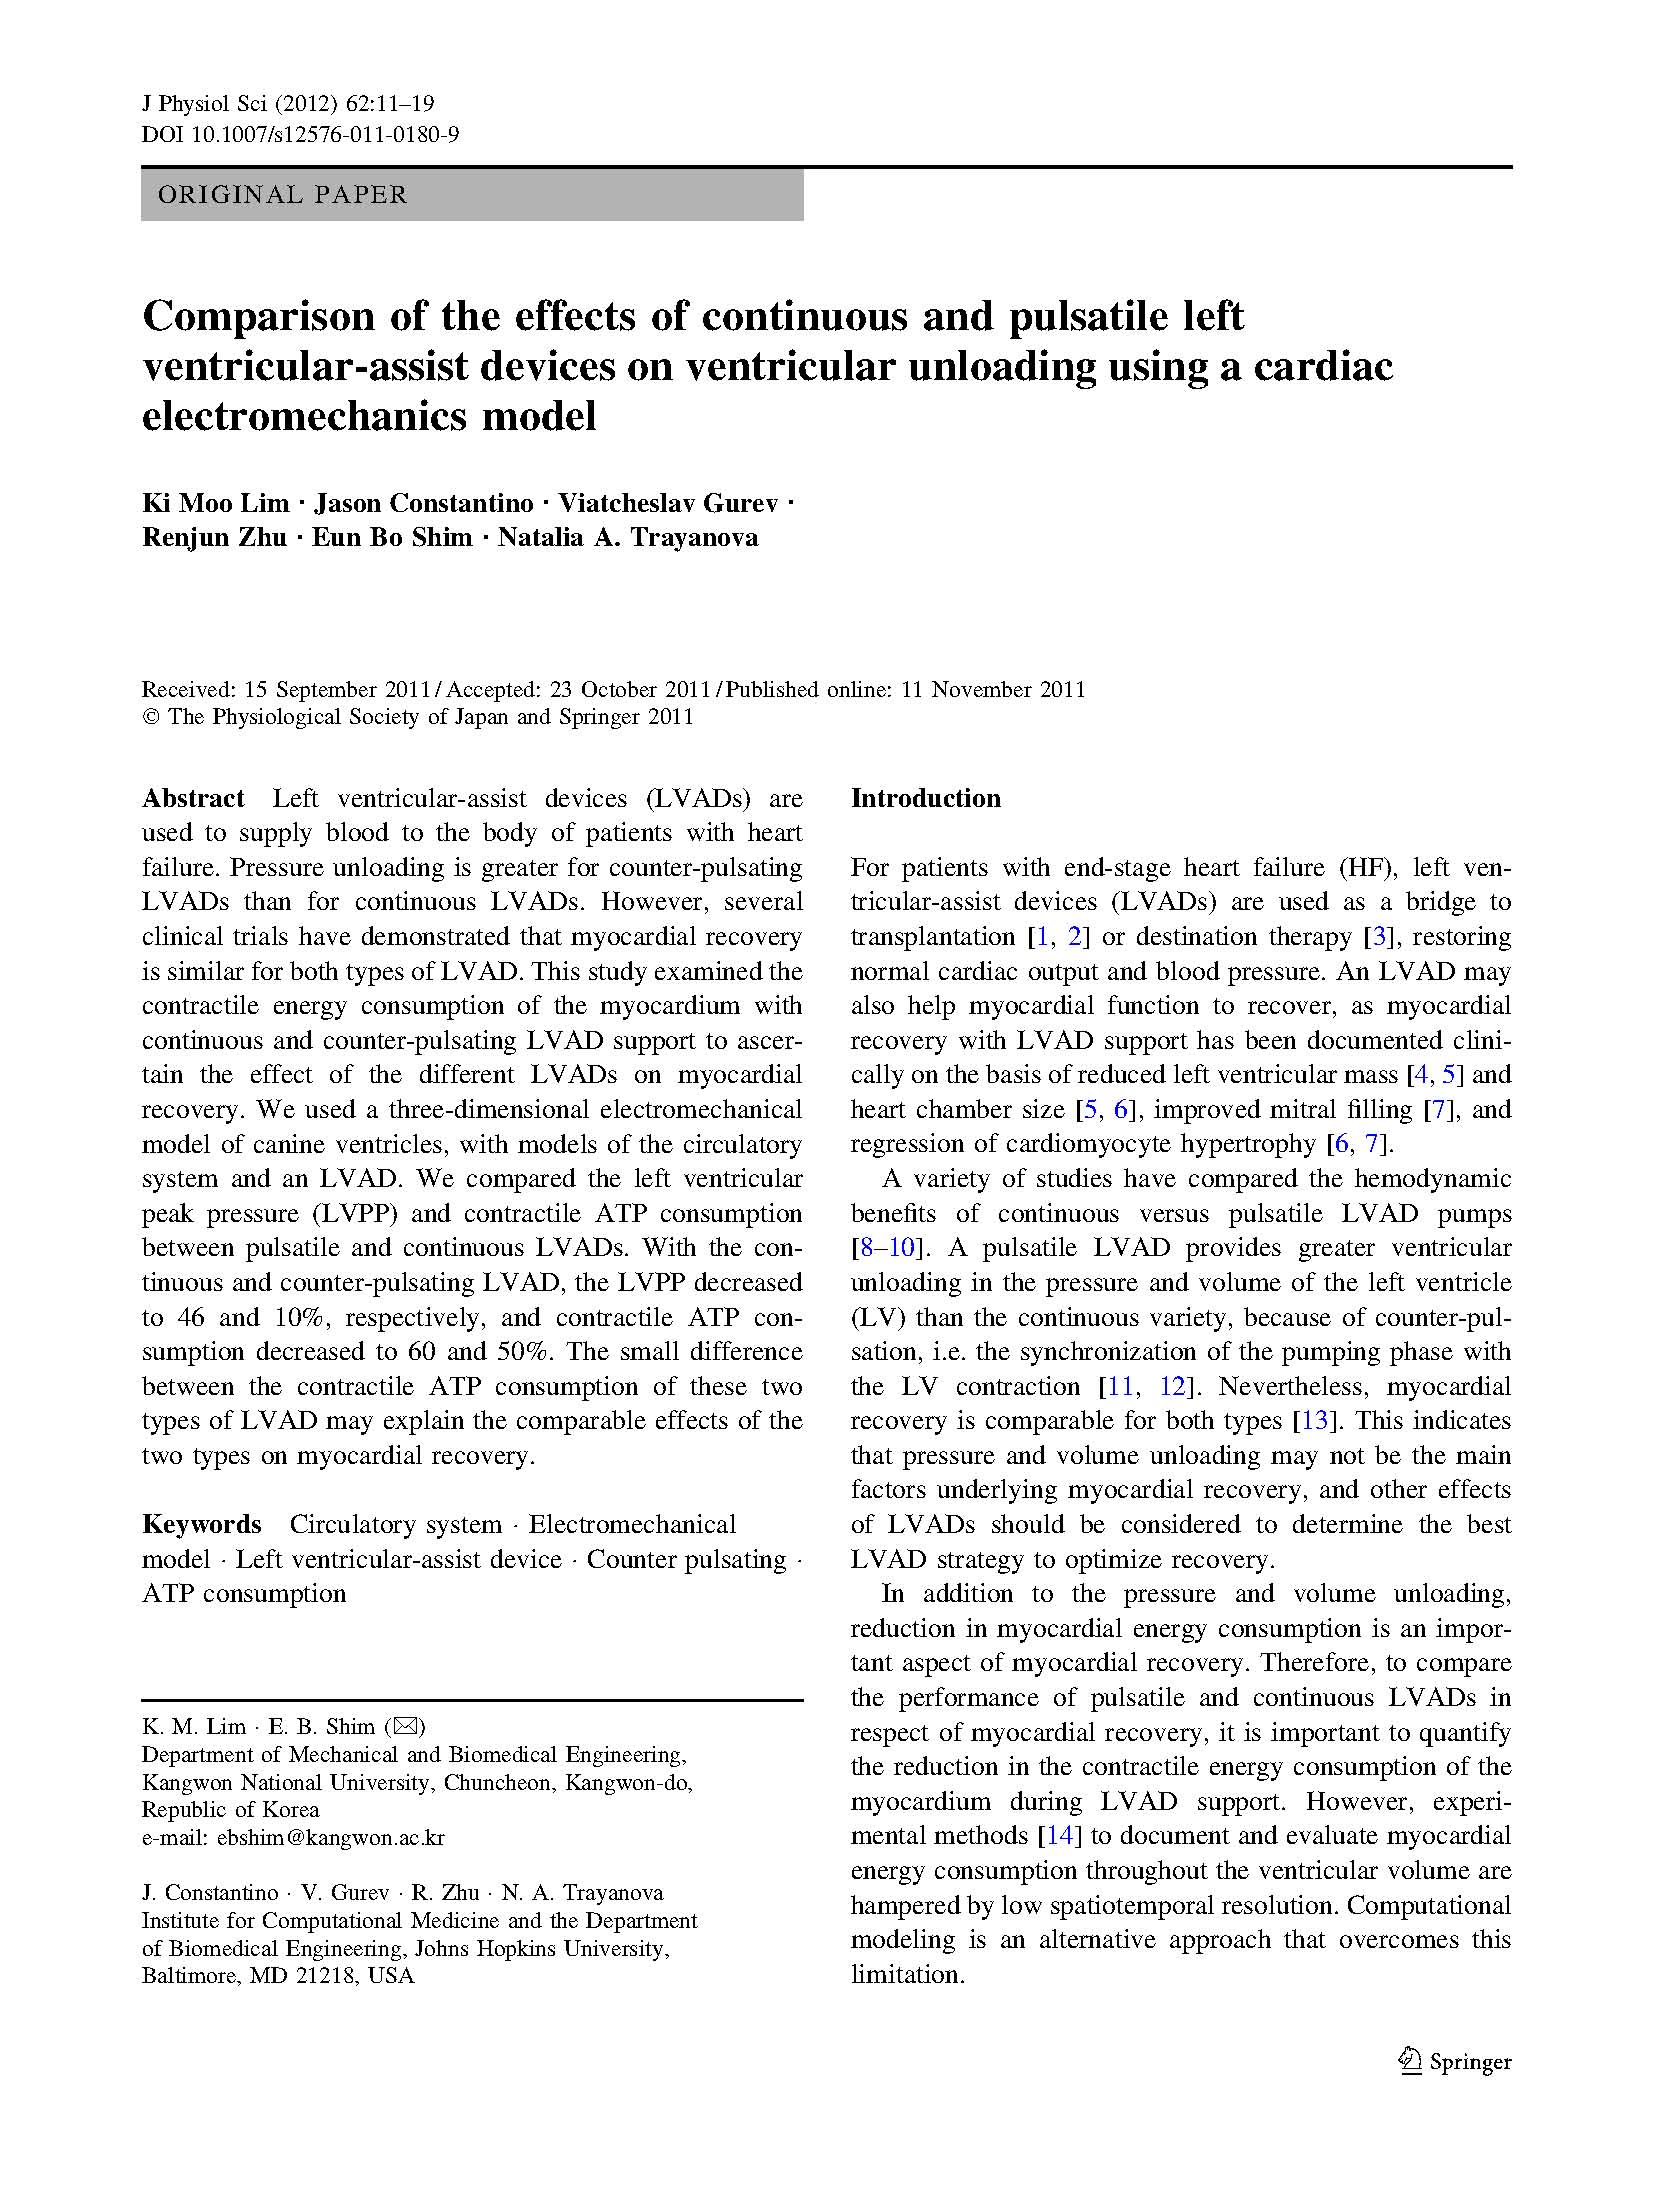 Comparison of the Effects of Continuous and Pulsatile Left Ventricular Assist Devices on Ventricular Unloading using a Cardiac Electromechanics Model.jpg 1654X2197